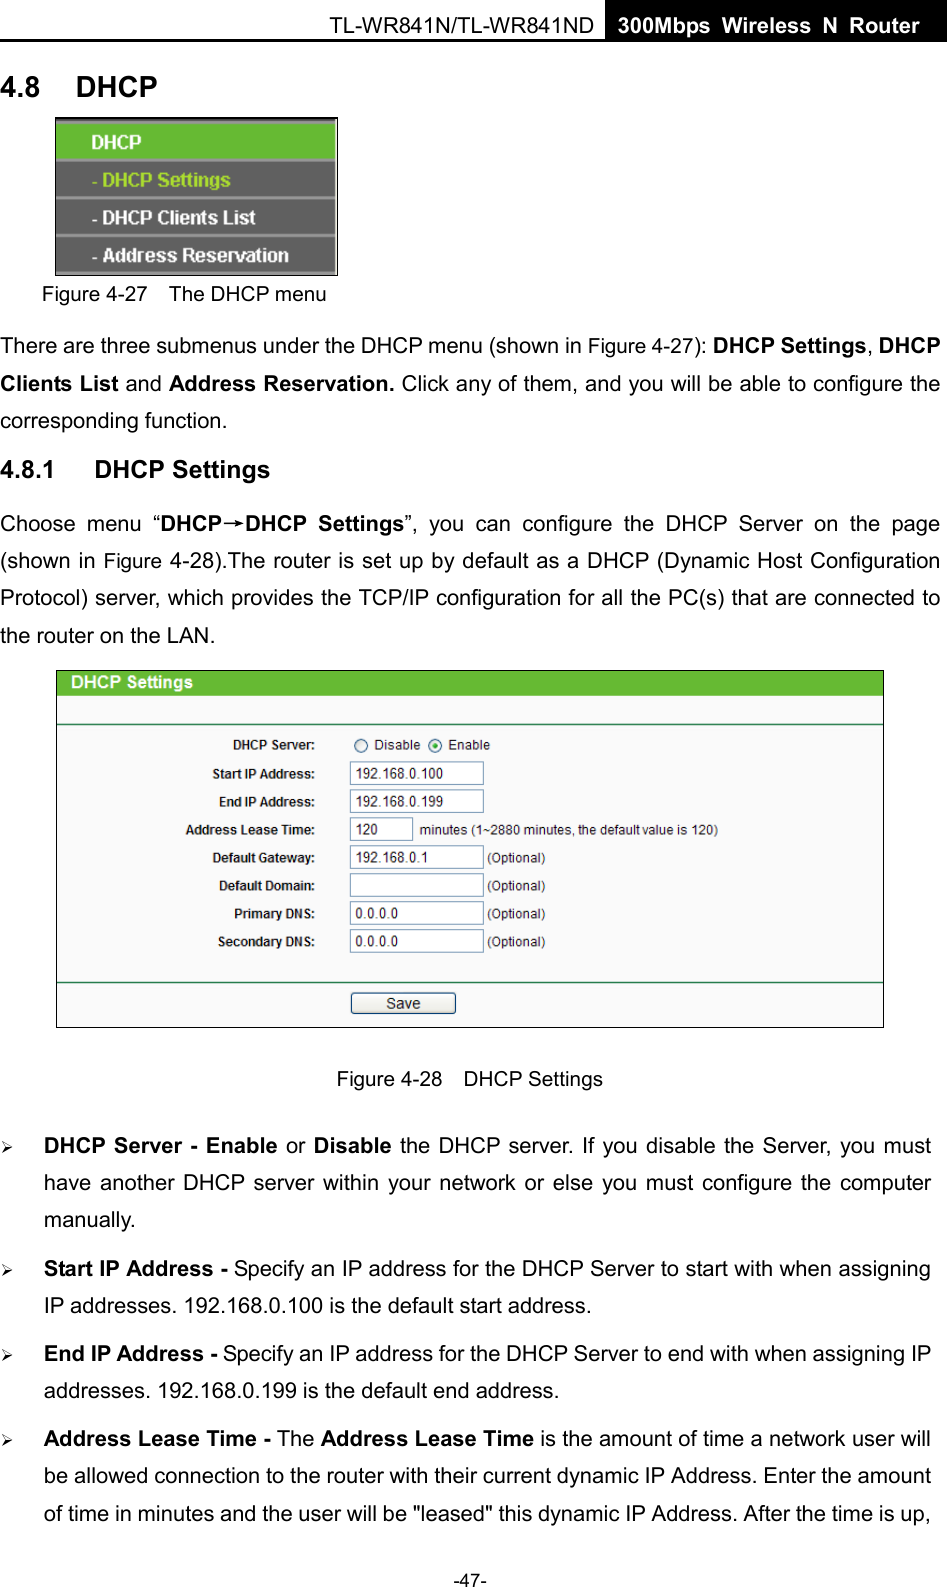  TL-WR841N/TL-WR841ND  300Mbps Wireless N Router    4.8 DHCP  Figure 4-27  The DHCP menu There are three submenus under the DHCP menu (shown in Figure 4-27): DHCP Settings, DHCP Clients List and Address Reservation. Click any of them, and you will be able to configure the corresponding function. 4.8.1 DHCP Settings Choose menu “DHCP→DHCP Settings”, you can configure the DHCP Server on the page (shown in Figure 4-28).The router is set up by default as a DHCP (Dynamic Host Configuration Protocol) server, which provides the TCP/IP configuration for all the PC(s) that are connected to the router on the LAN.    Figure 4-28  DHCP Settings  DHCP Server - Enable or Disable the DHCP server. If you disable the Server, you must have another DHCP server within your network or else you must configure the computer manually.  Start IP Address - Specify an IP address for the DHCP Server to start with when assigning IP addresses. 192.168.0.100 is the default start address.  End IP Address - Specify an IP address for the DHCP Server to end with when assigning IP addresses. 192.168.0.199 is the default end address.  Address Lease Time - The Address Lease Time is the amount of time a network user will be allowed connection to the router with their current dynamic IP Address. Enter the amount of time in minutes and the user will be &quot;leased&quot; this dynamic IP Address. After the time is up, -47- 